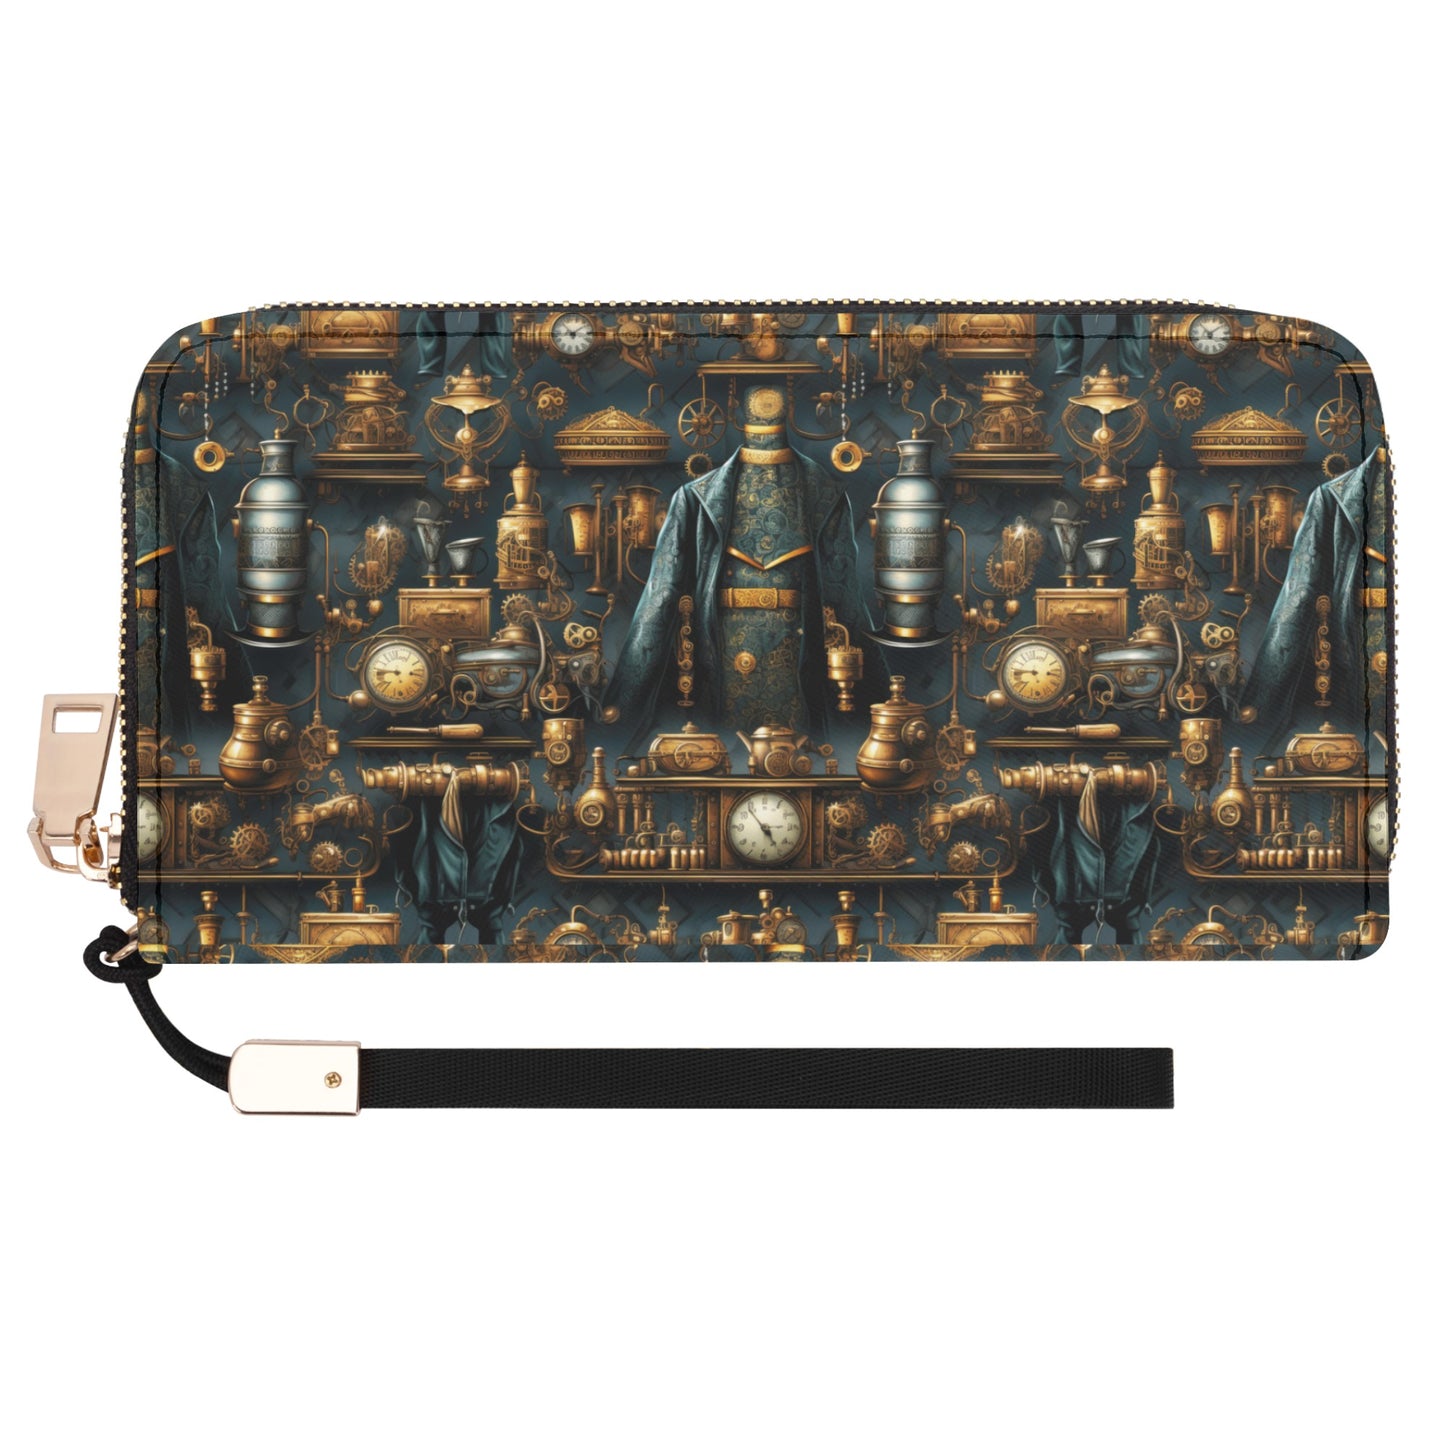 Steampunk Victorian Design with Gears and Mechanical Elements - Wristlet Wallet Leather (PU)